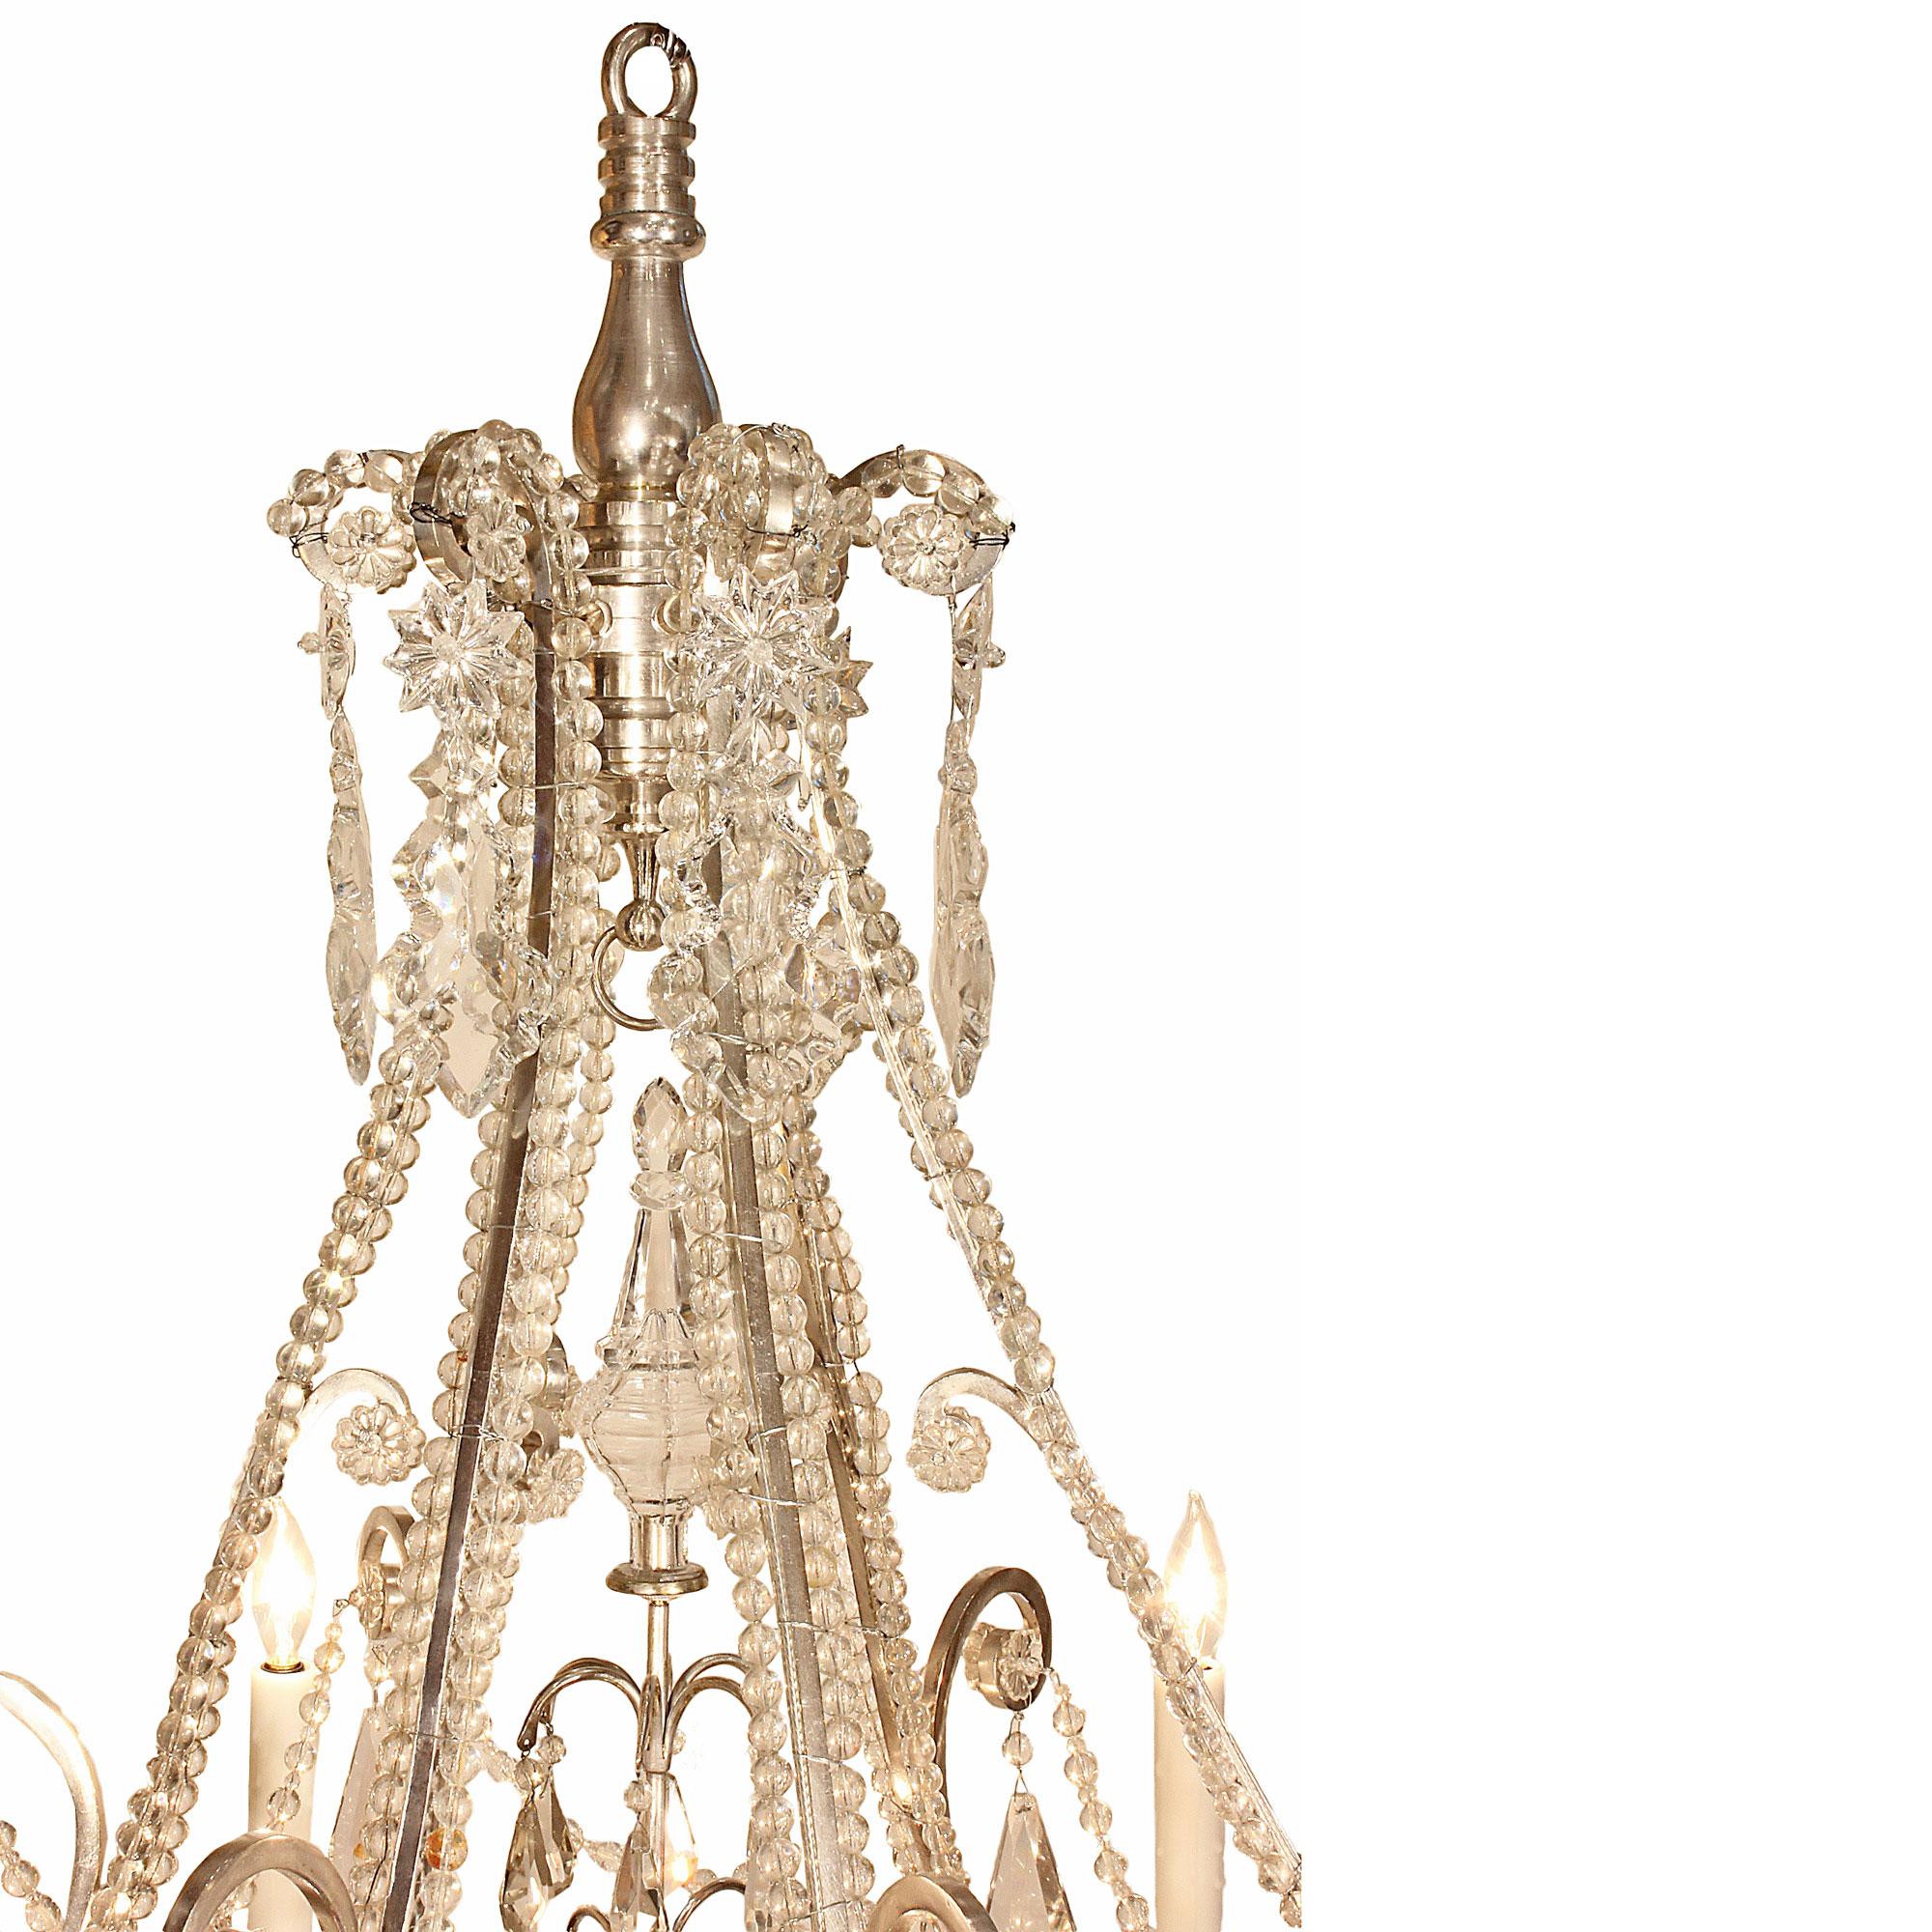 A very elegant and unique French 19th century Louis XV st. silvered bronze and Baccarat crystal chandelier. The chandelier had a scrolled silver base with impressive Baccarats crystal pendants centered by a large crystal sphere below smaller beads.